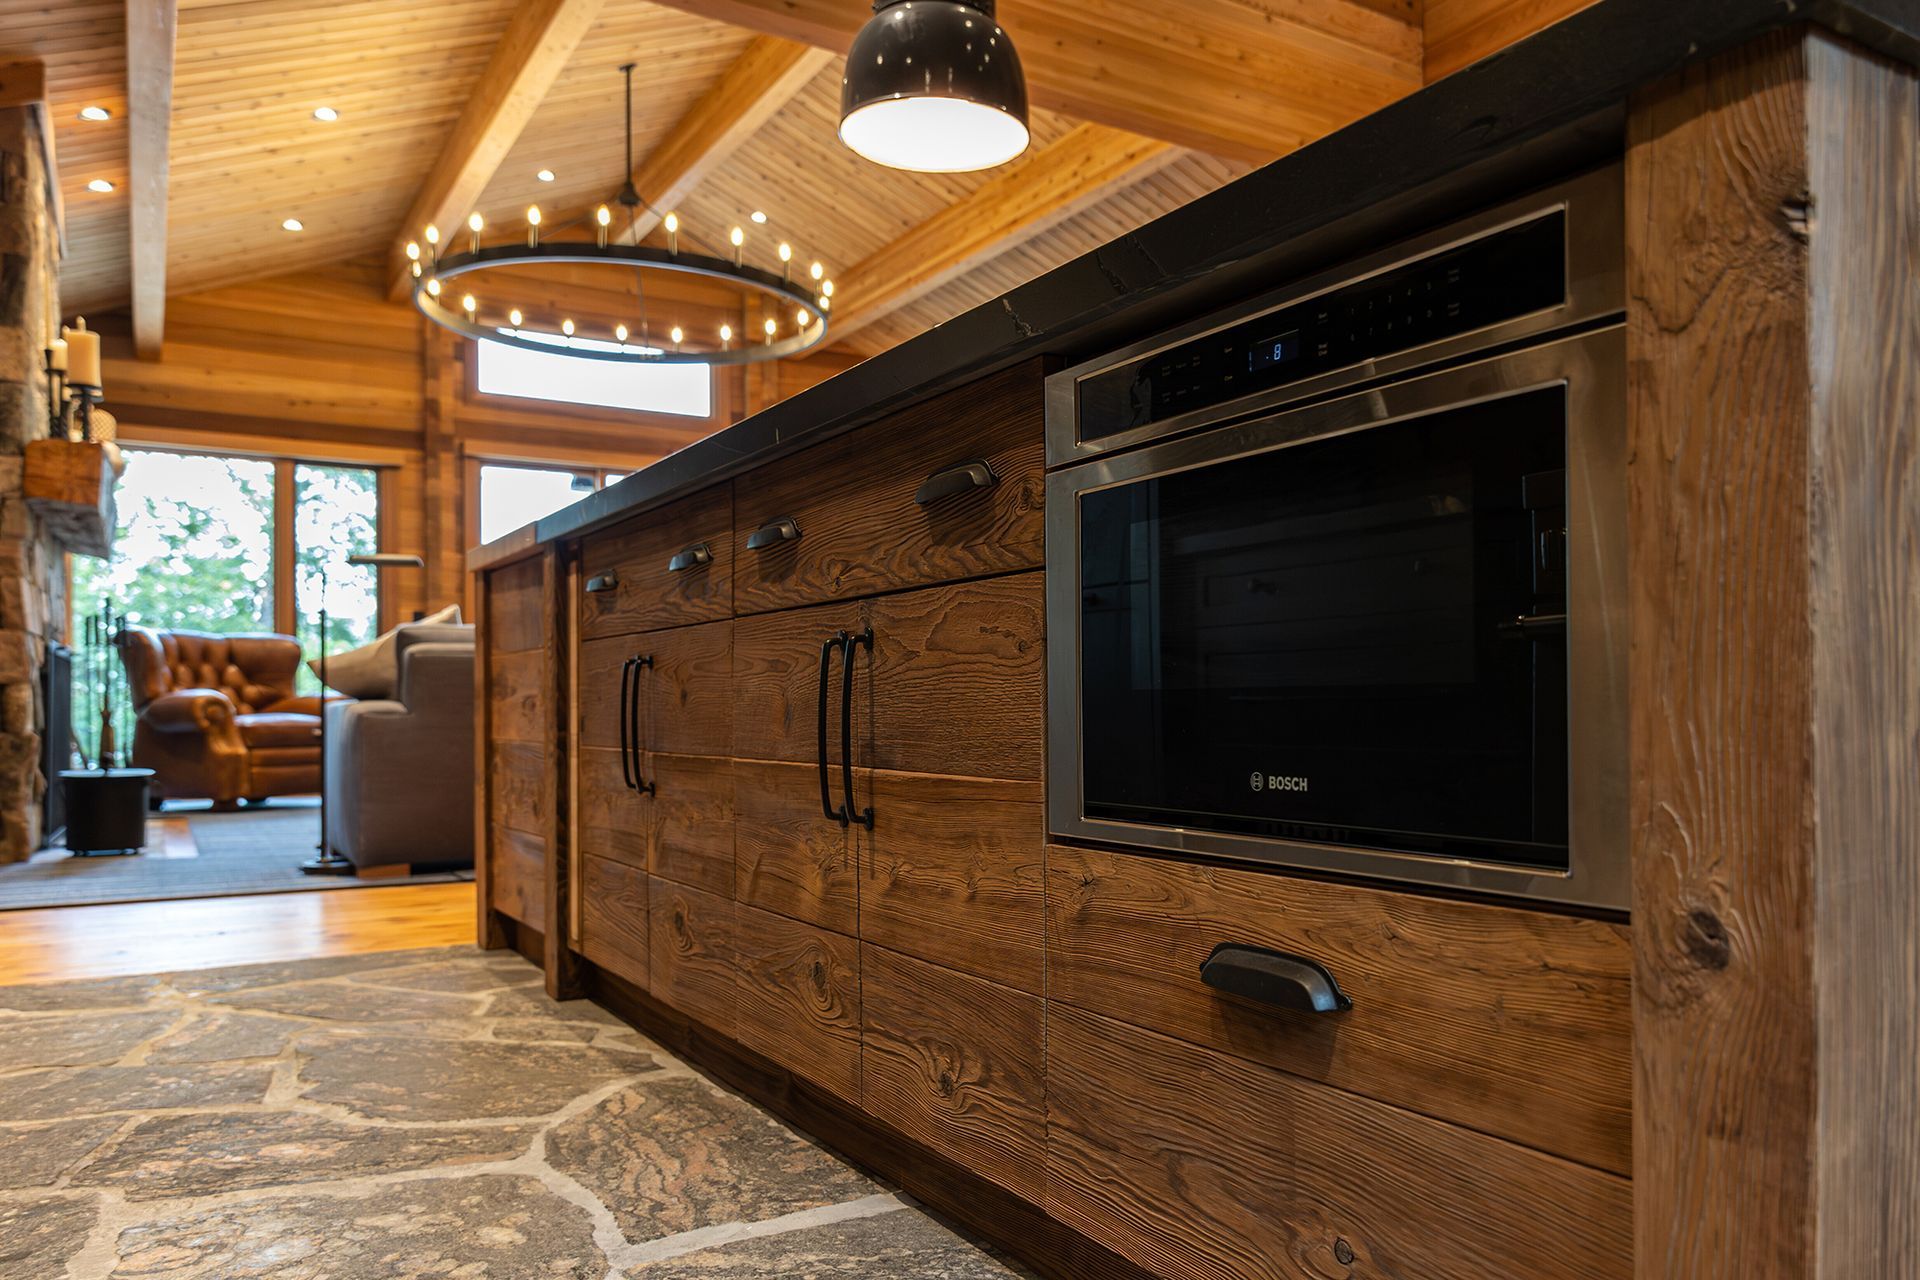 Low view of the rustic, wooden cabinets and slate flooring within the kitchen of a cedar cottage.